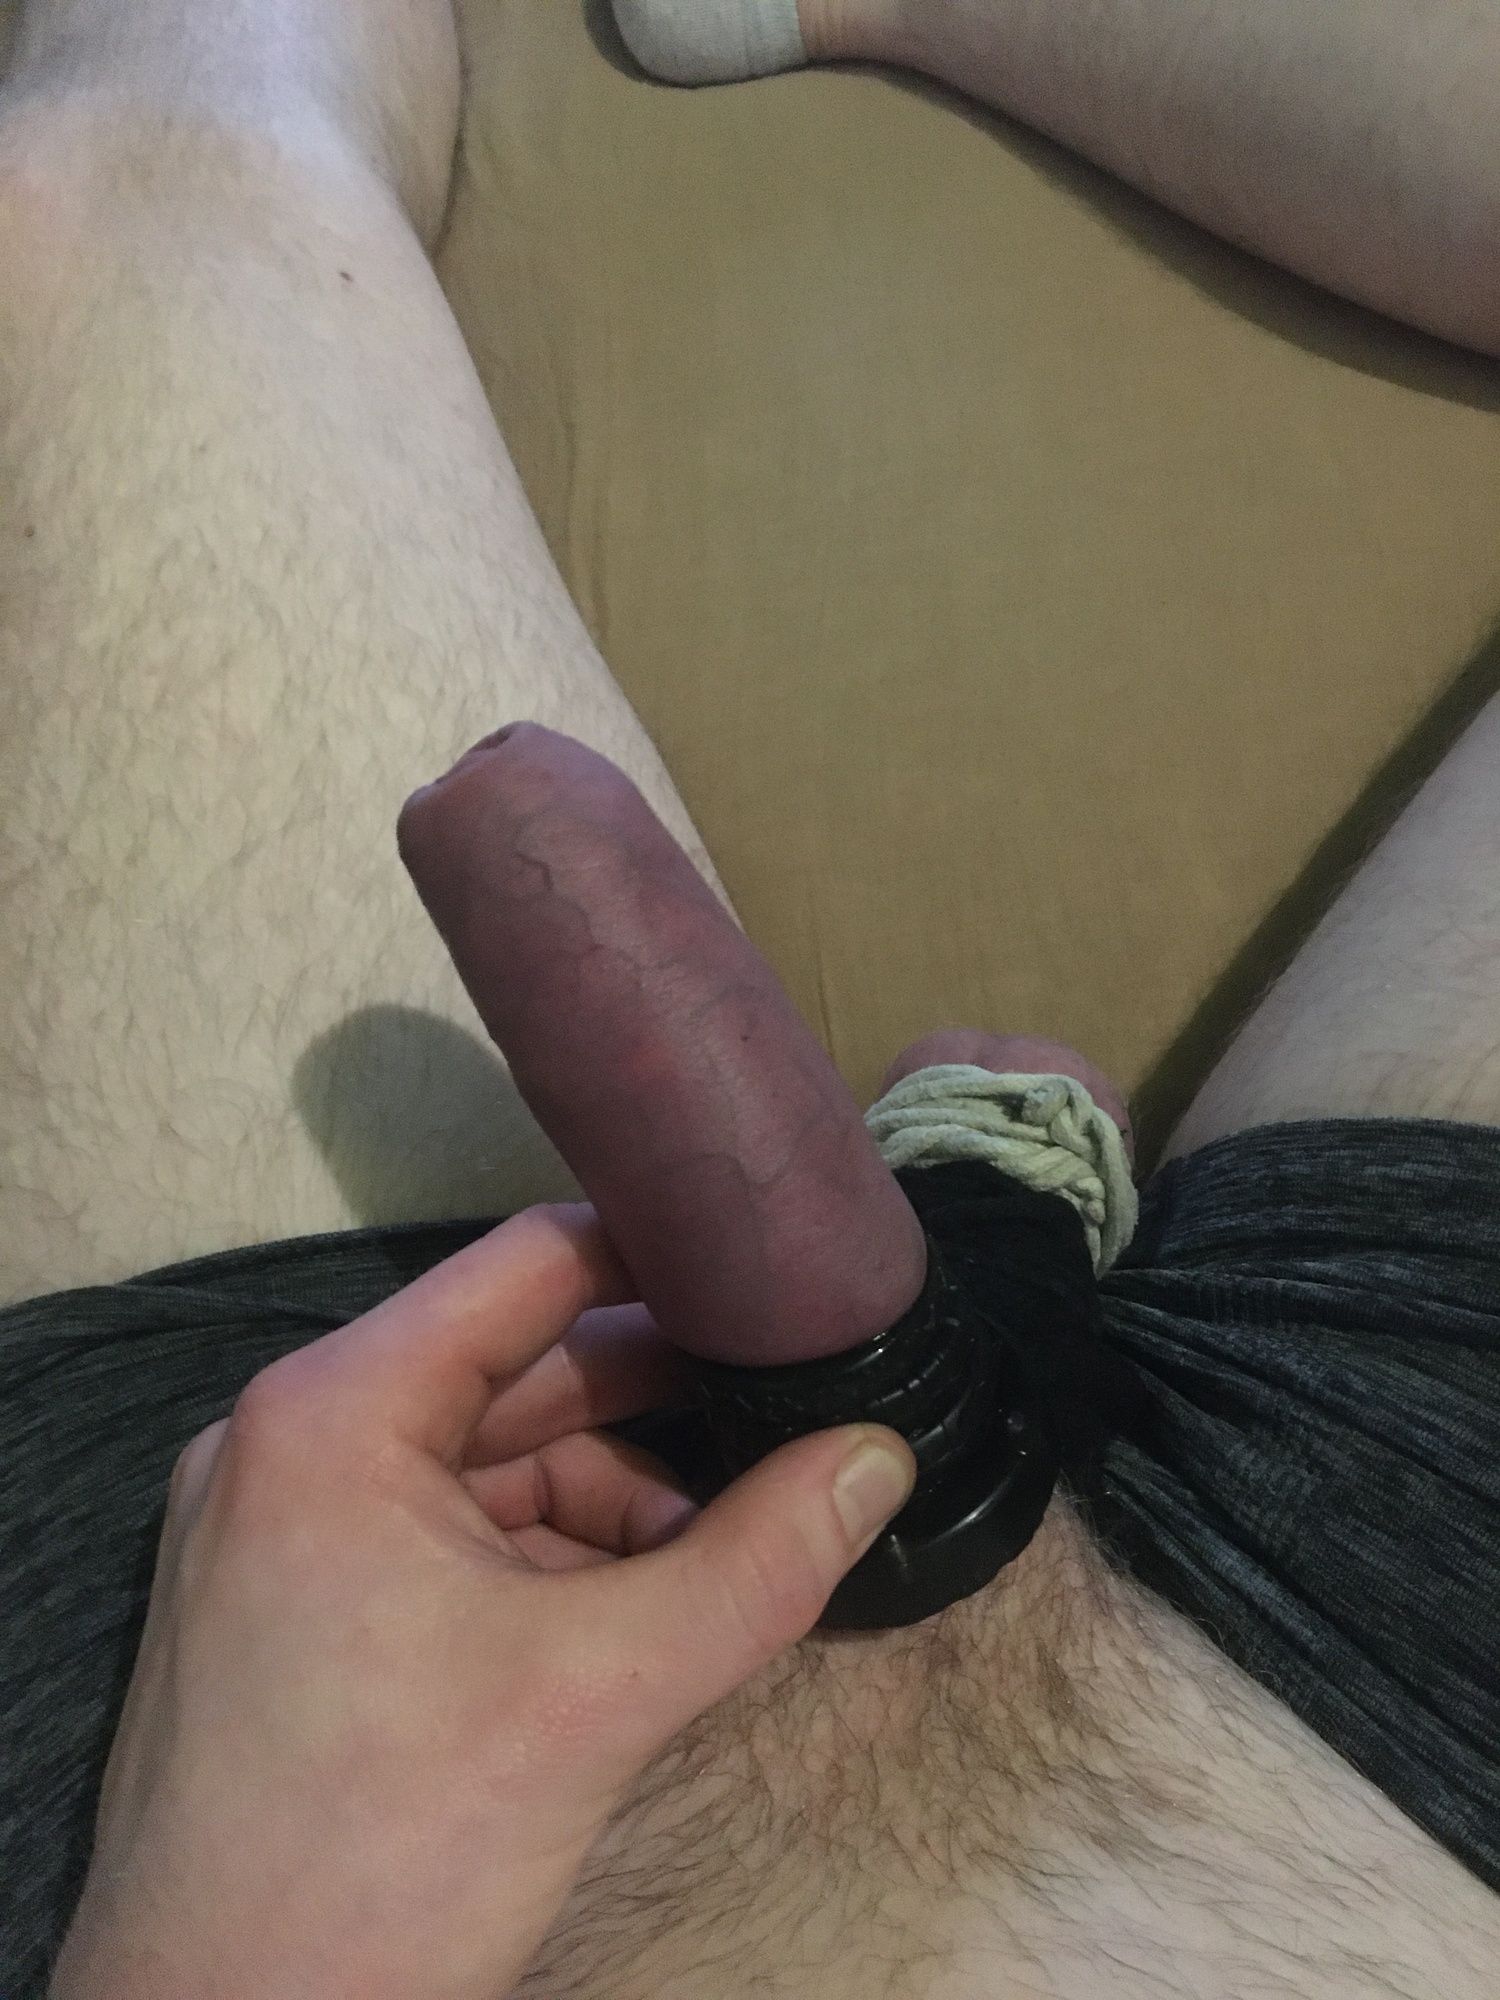 Balls Bound And Cock With Cockrings #5